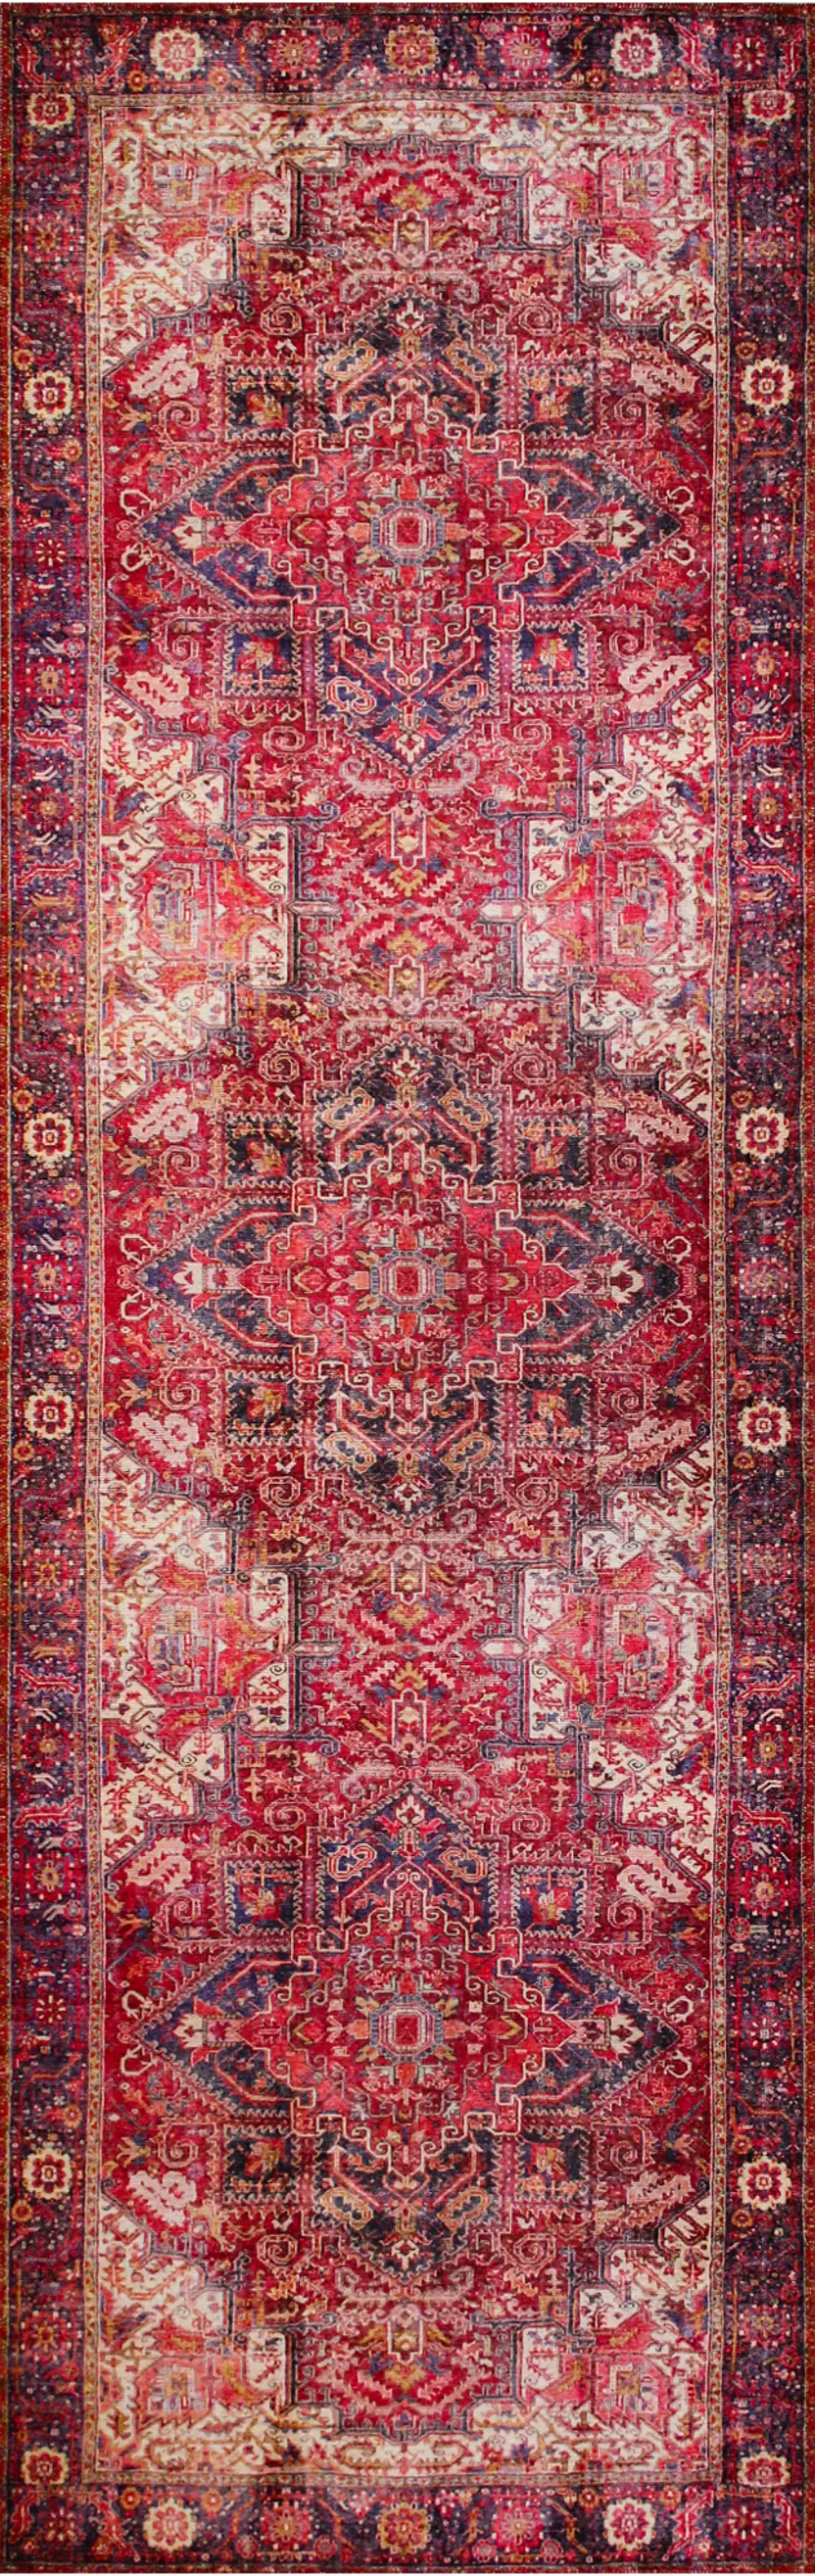 I166-RU-2.6X8-NR101 Traditional Zac Blue and Red 8 Foot Runner Rug - Impressions-1